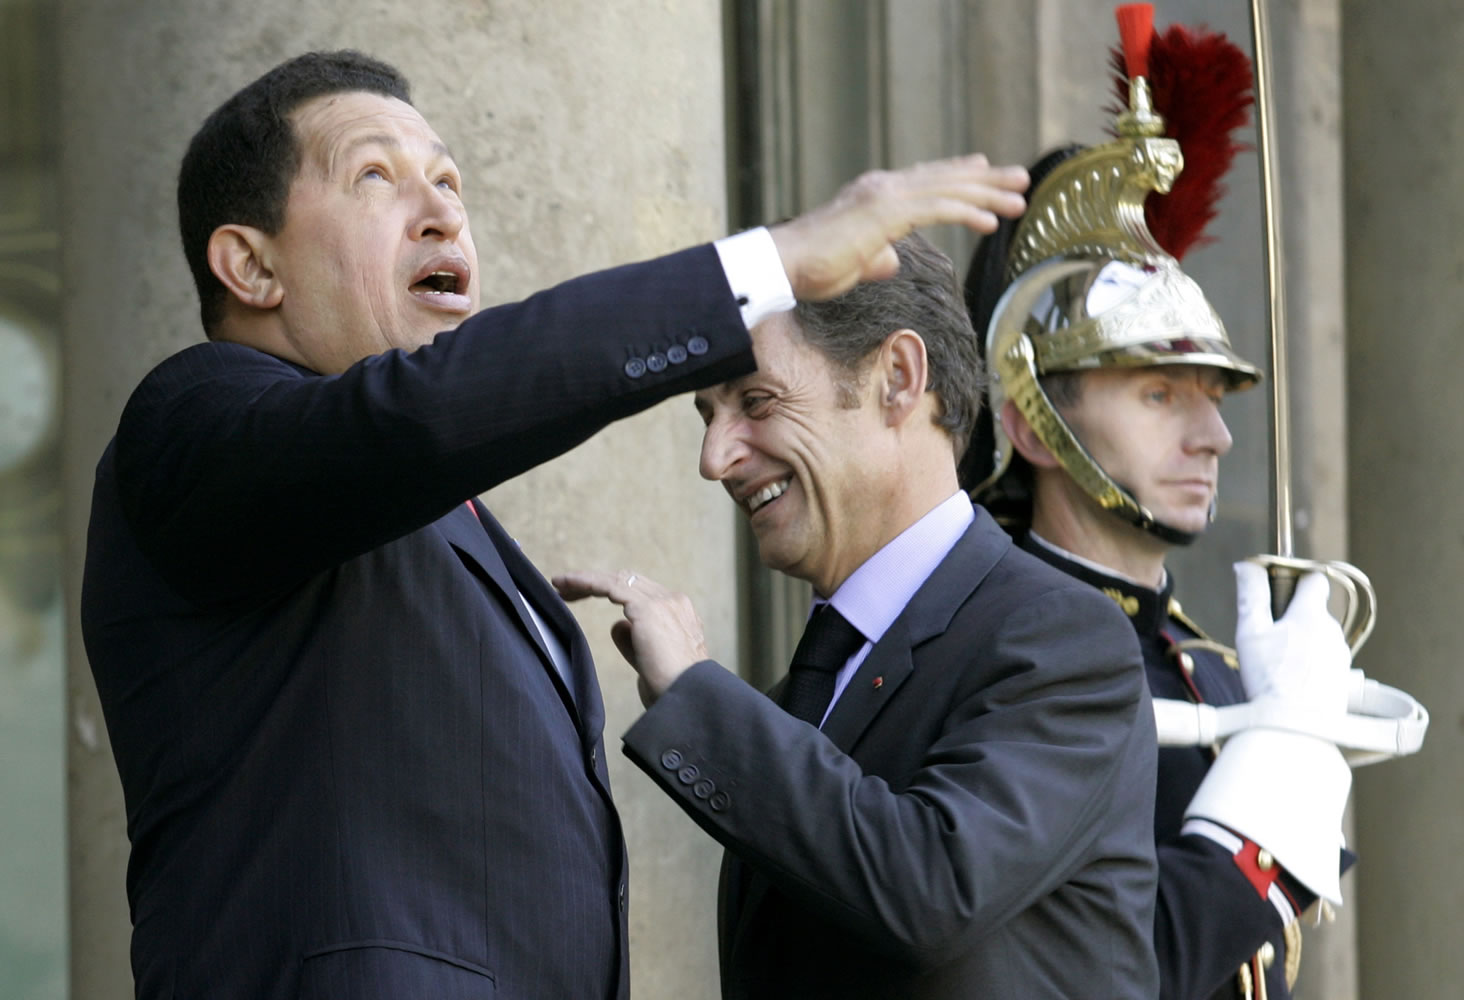 Then-French President Nicolas Sarkozy, center, and Venezuela's President Hugo Chavez share a light moment in Oct. 2008 prior to their meeting at the Elysee palace in Paris, France. Venezuela's Vice President Nicolas Maduro announced on Tuesday that Chavez has died.